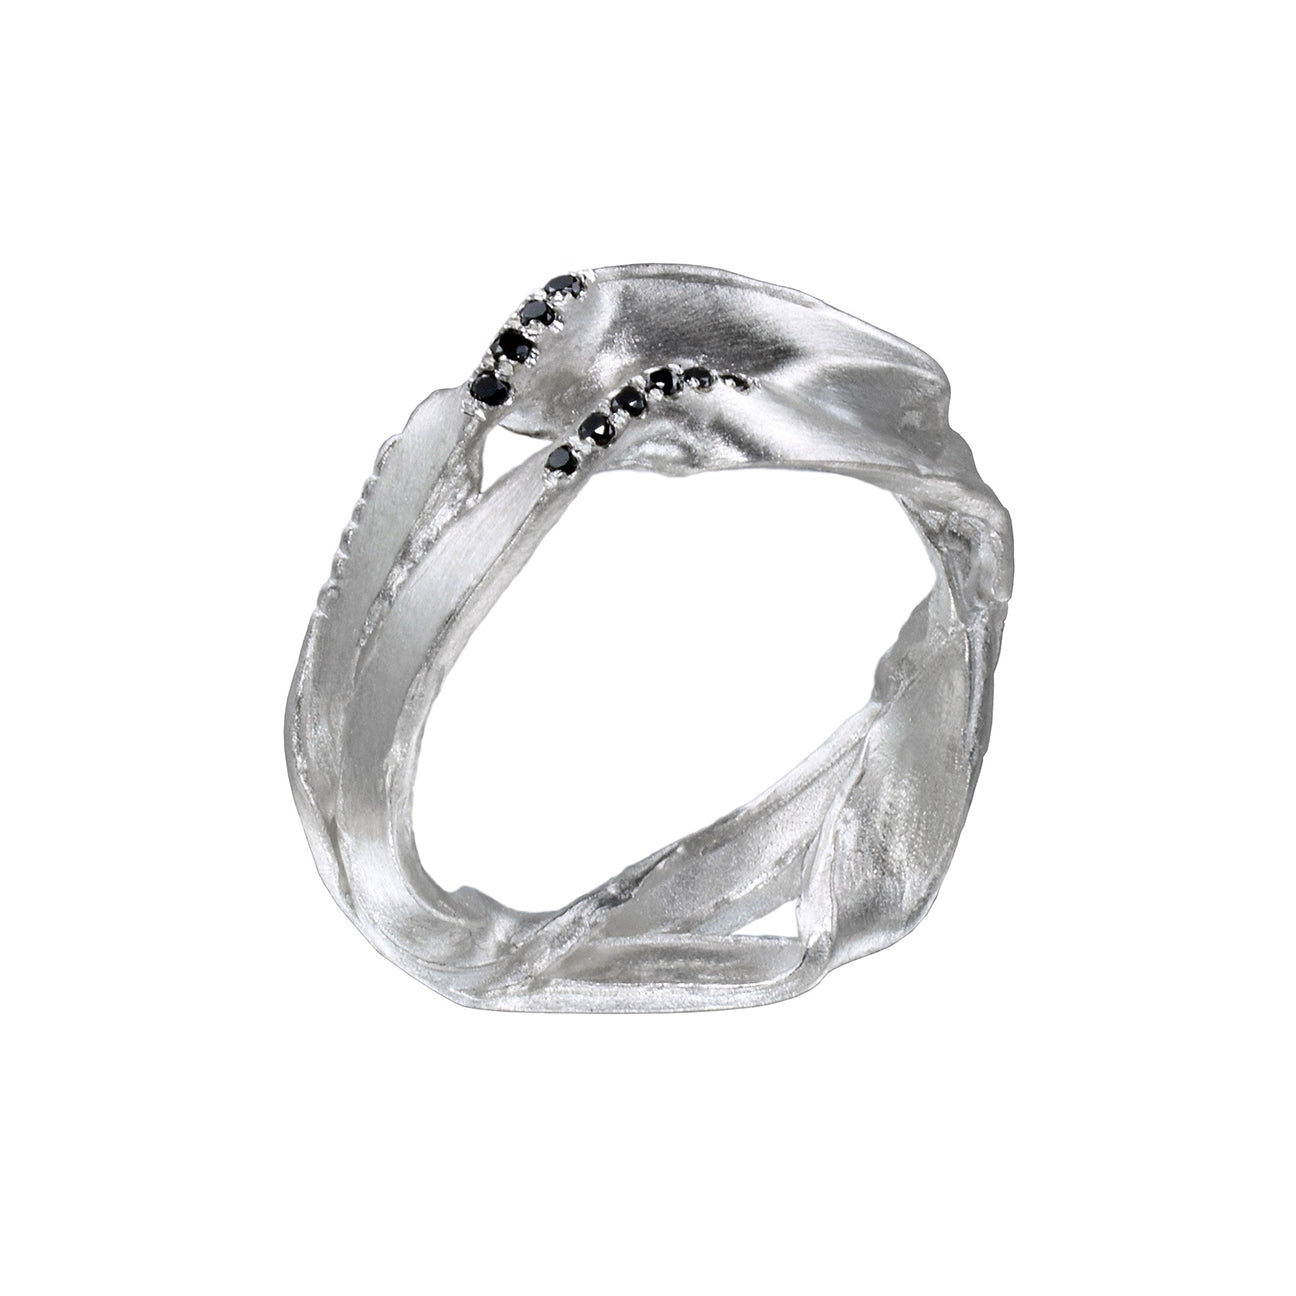 Seaweed Ring with Black Diamonds - Sterling Silver - US Size 6.5